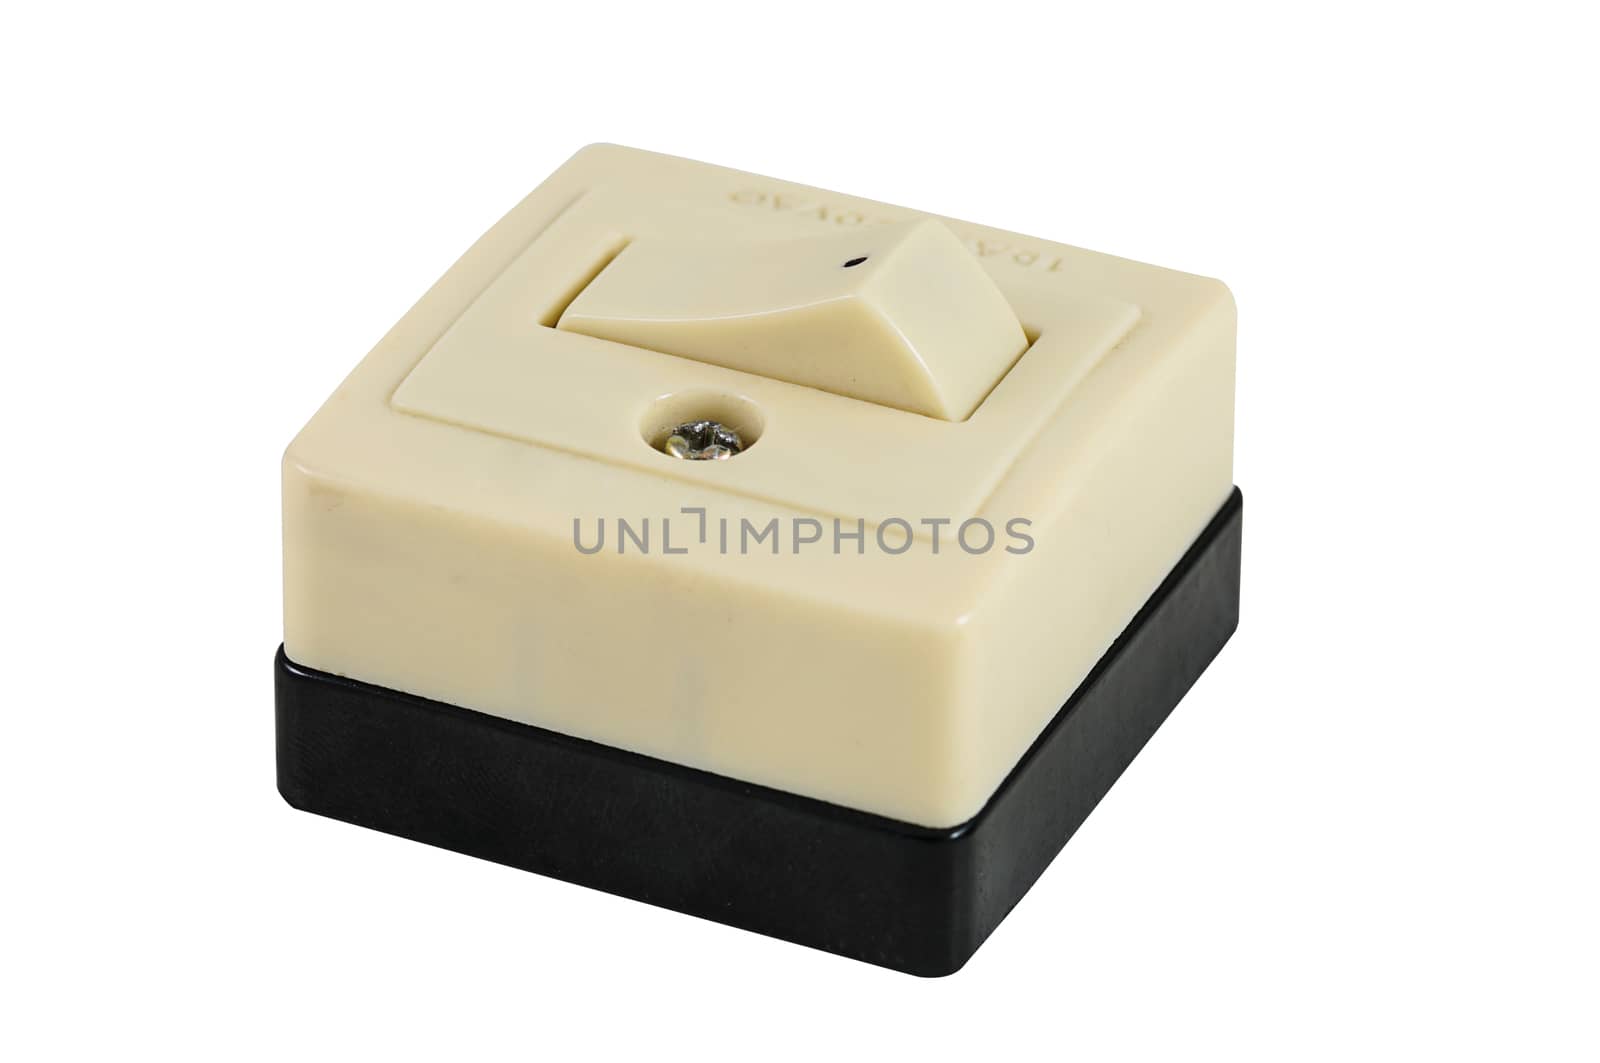 Retro power switch isolated on white background with clipping path